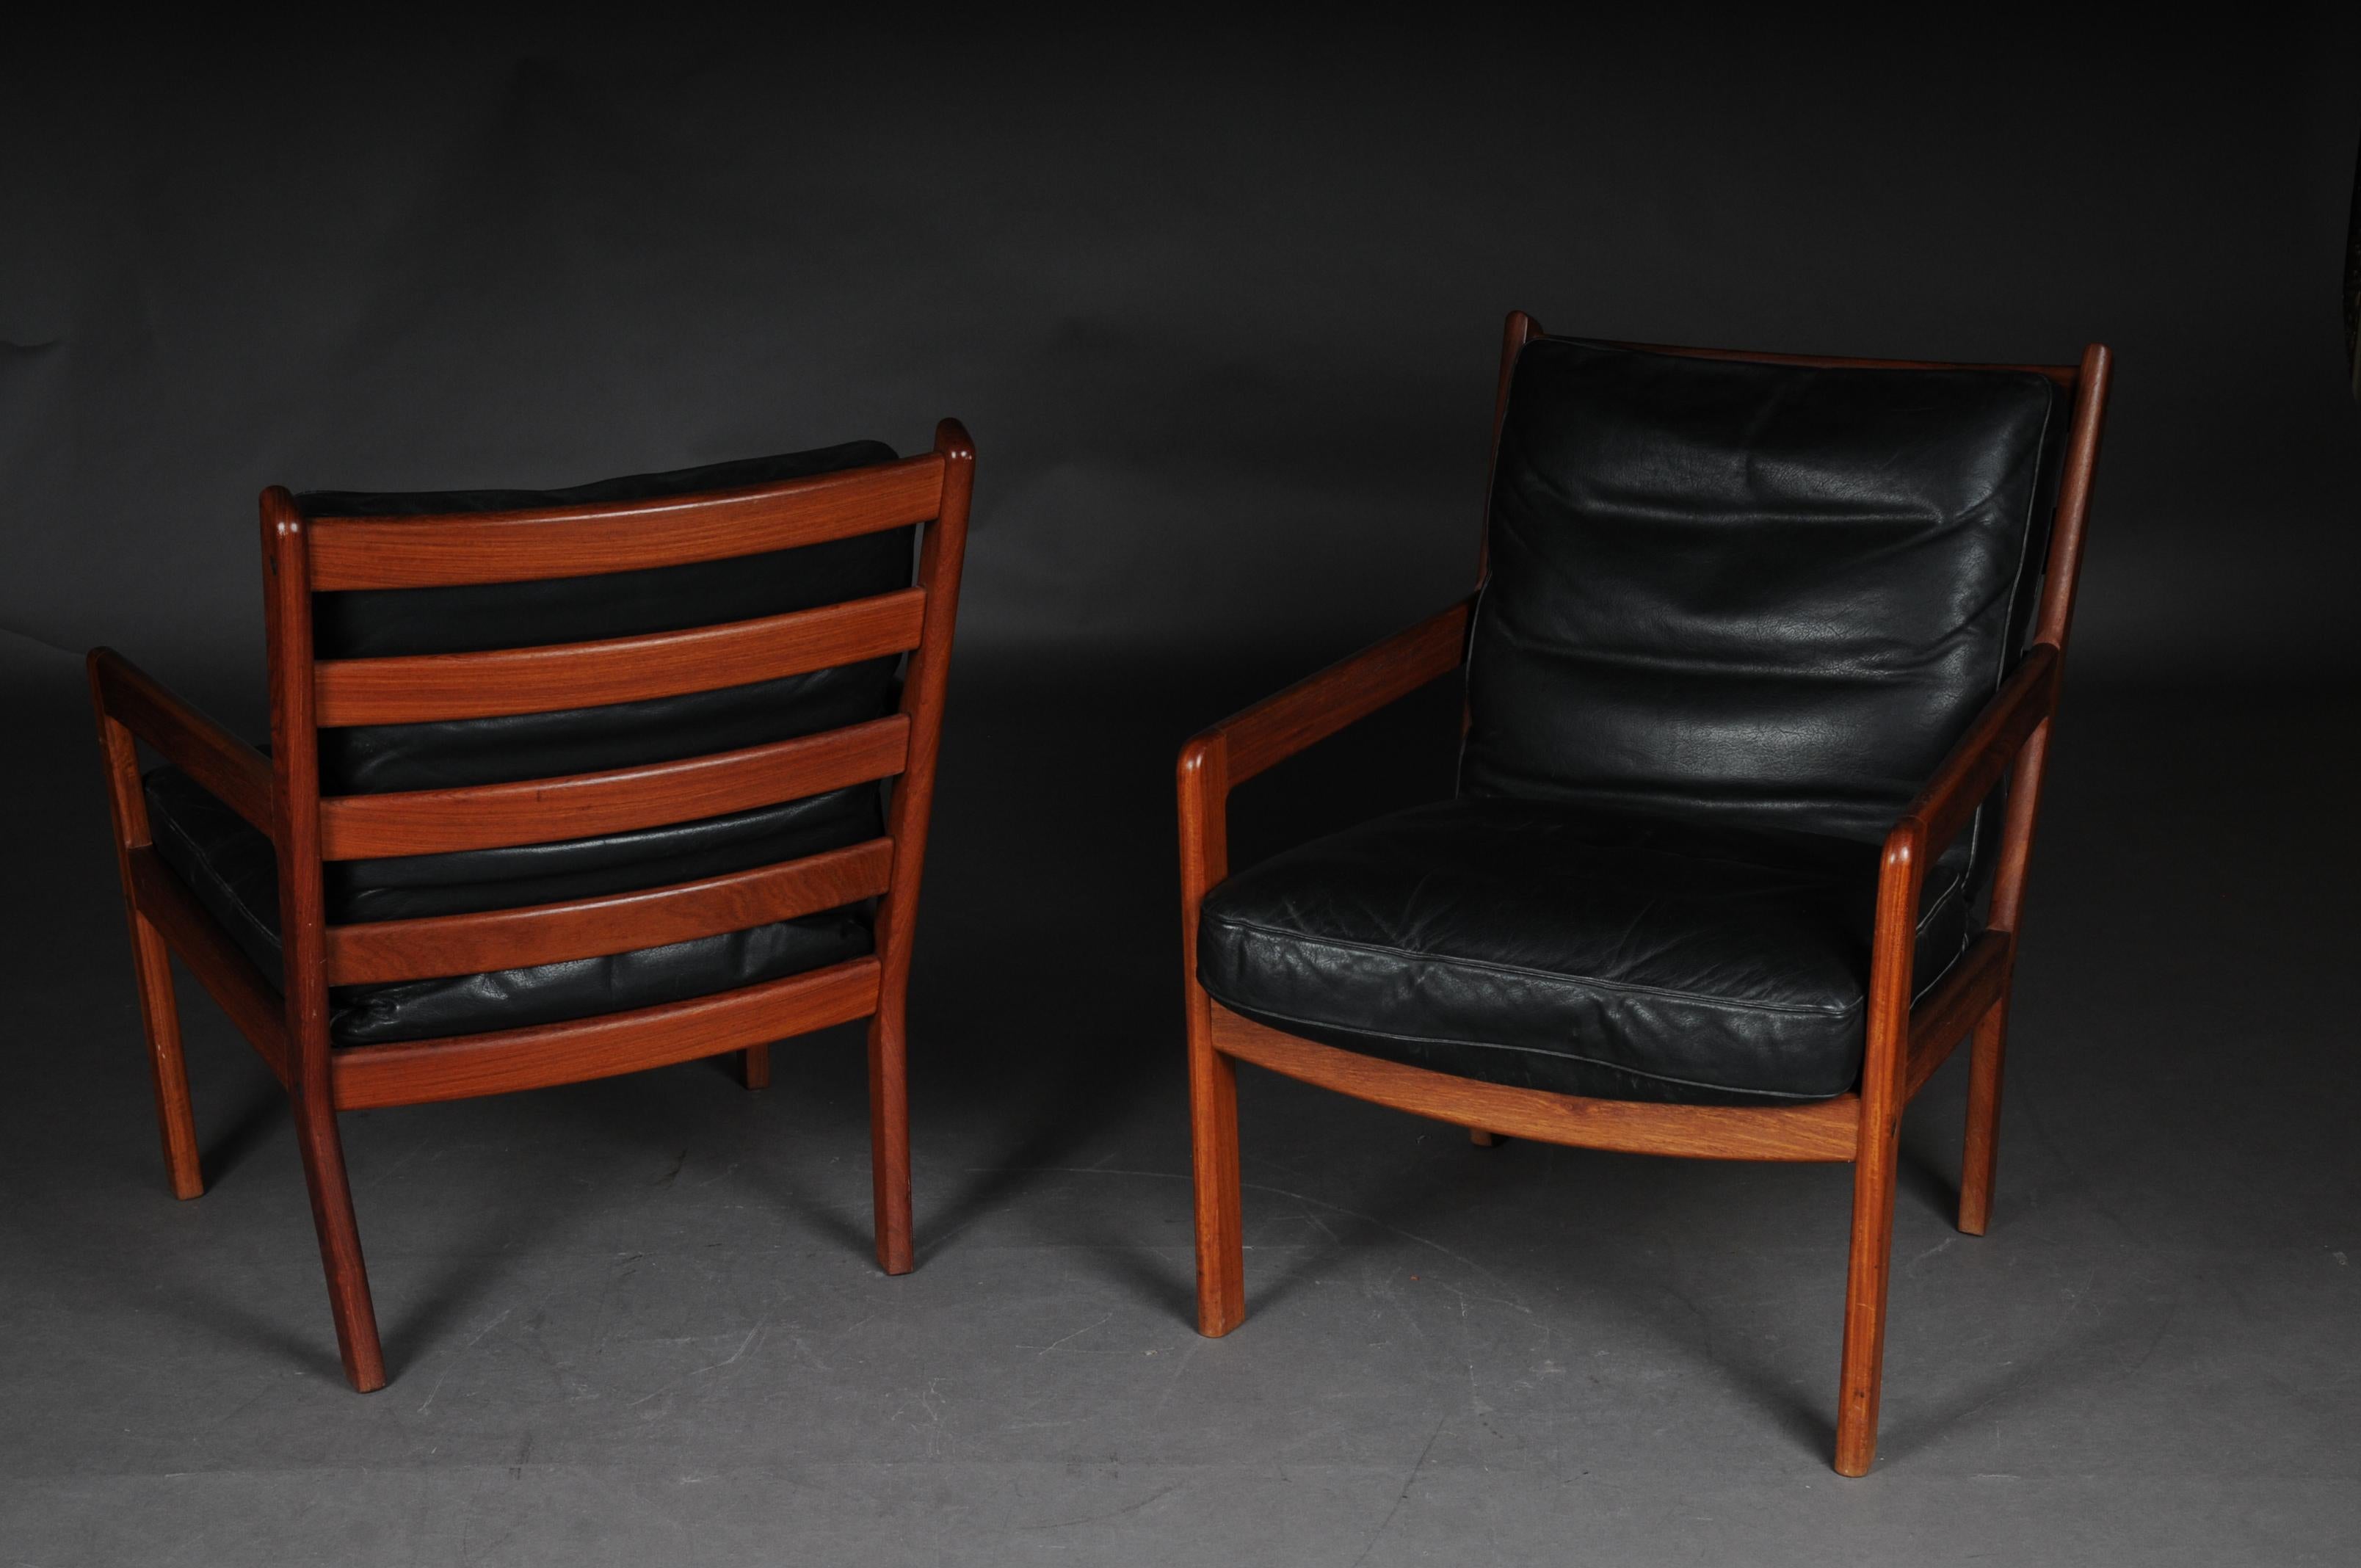 Pair of Vintage Teak Armchairs, Chairs, 1960s-1970s, Danish For Sale 9